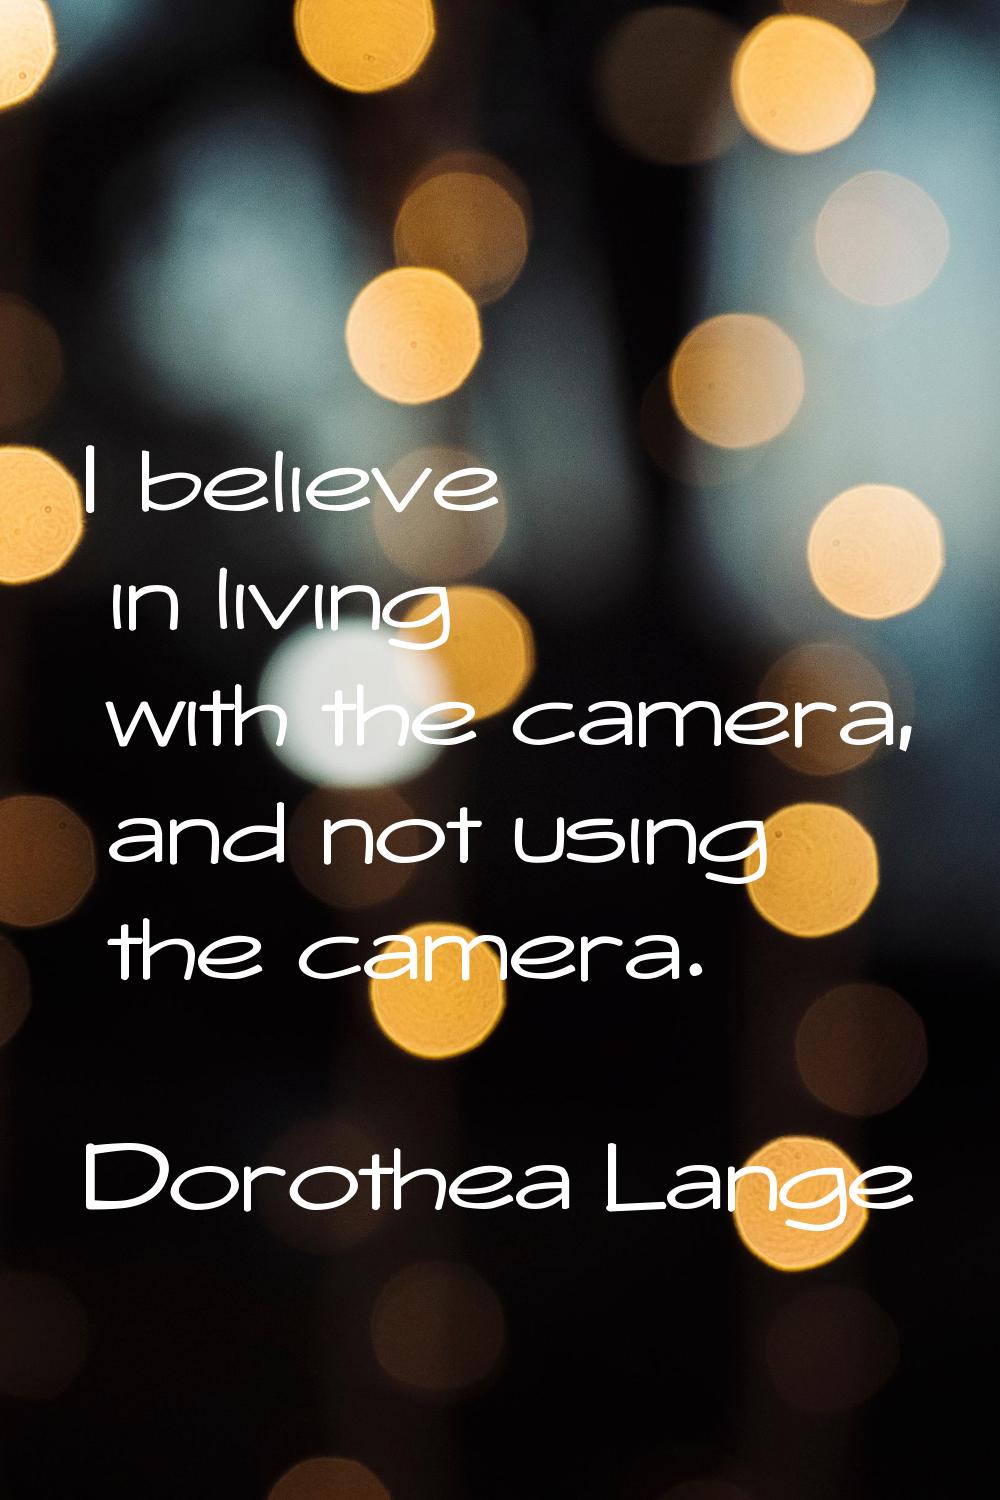 I believe in living with the camera, and not using the camera.